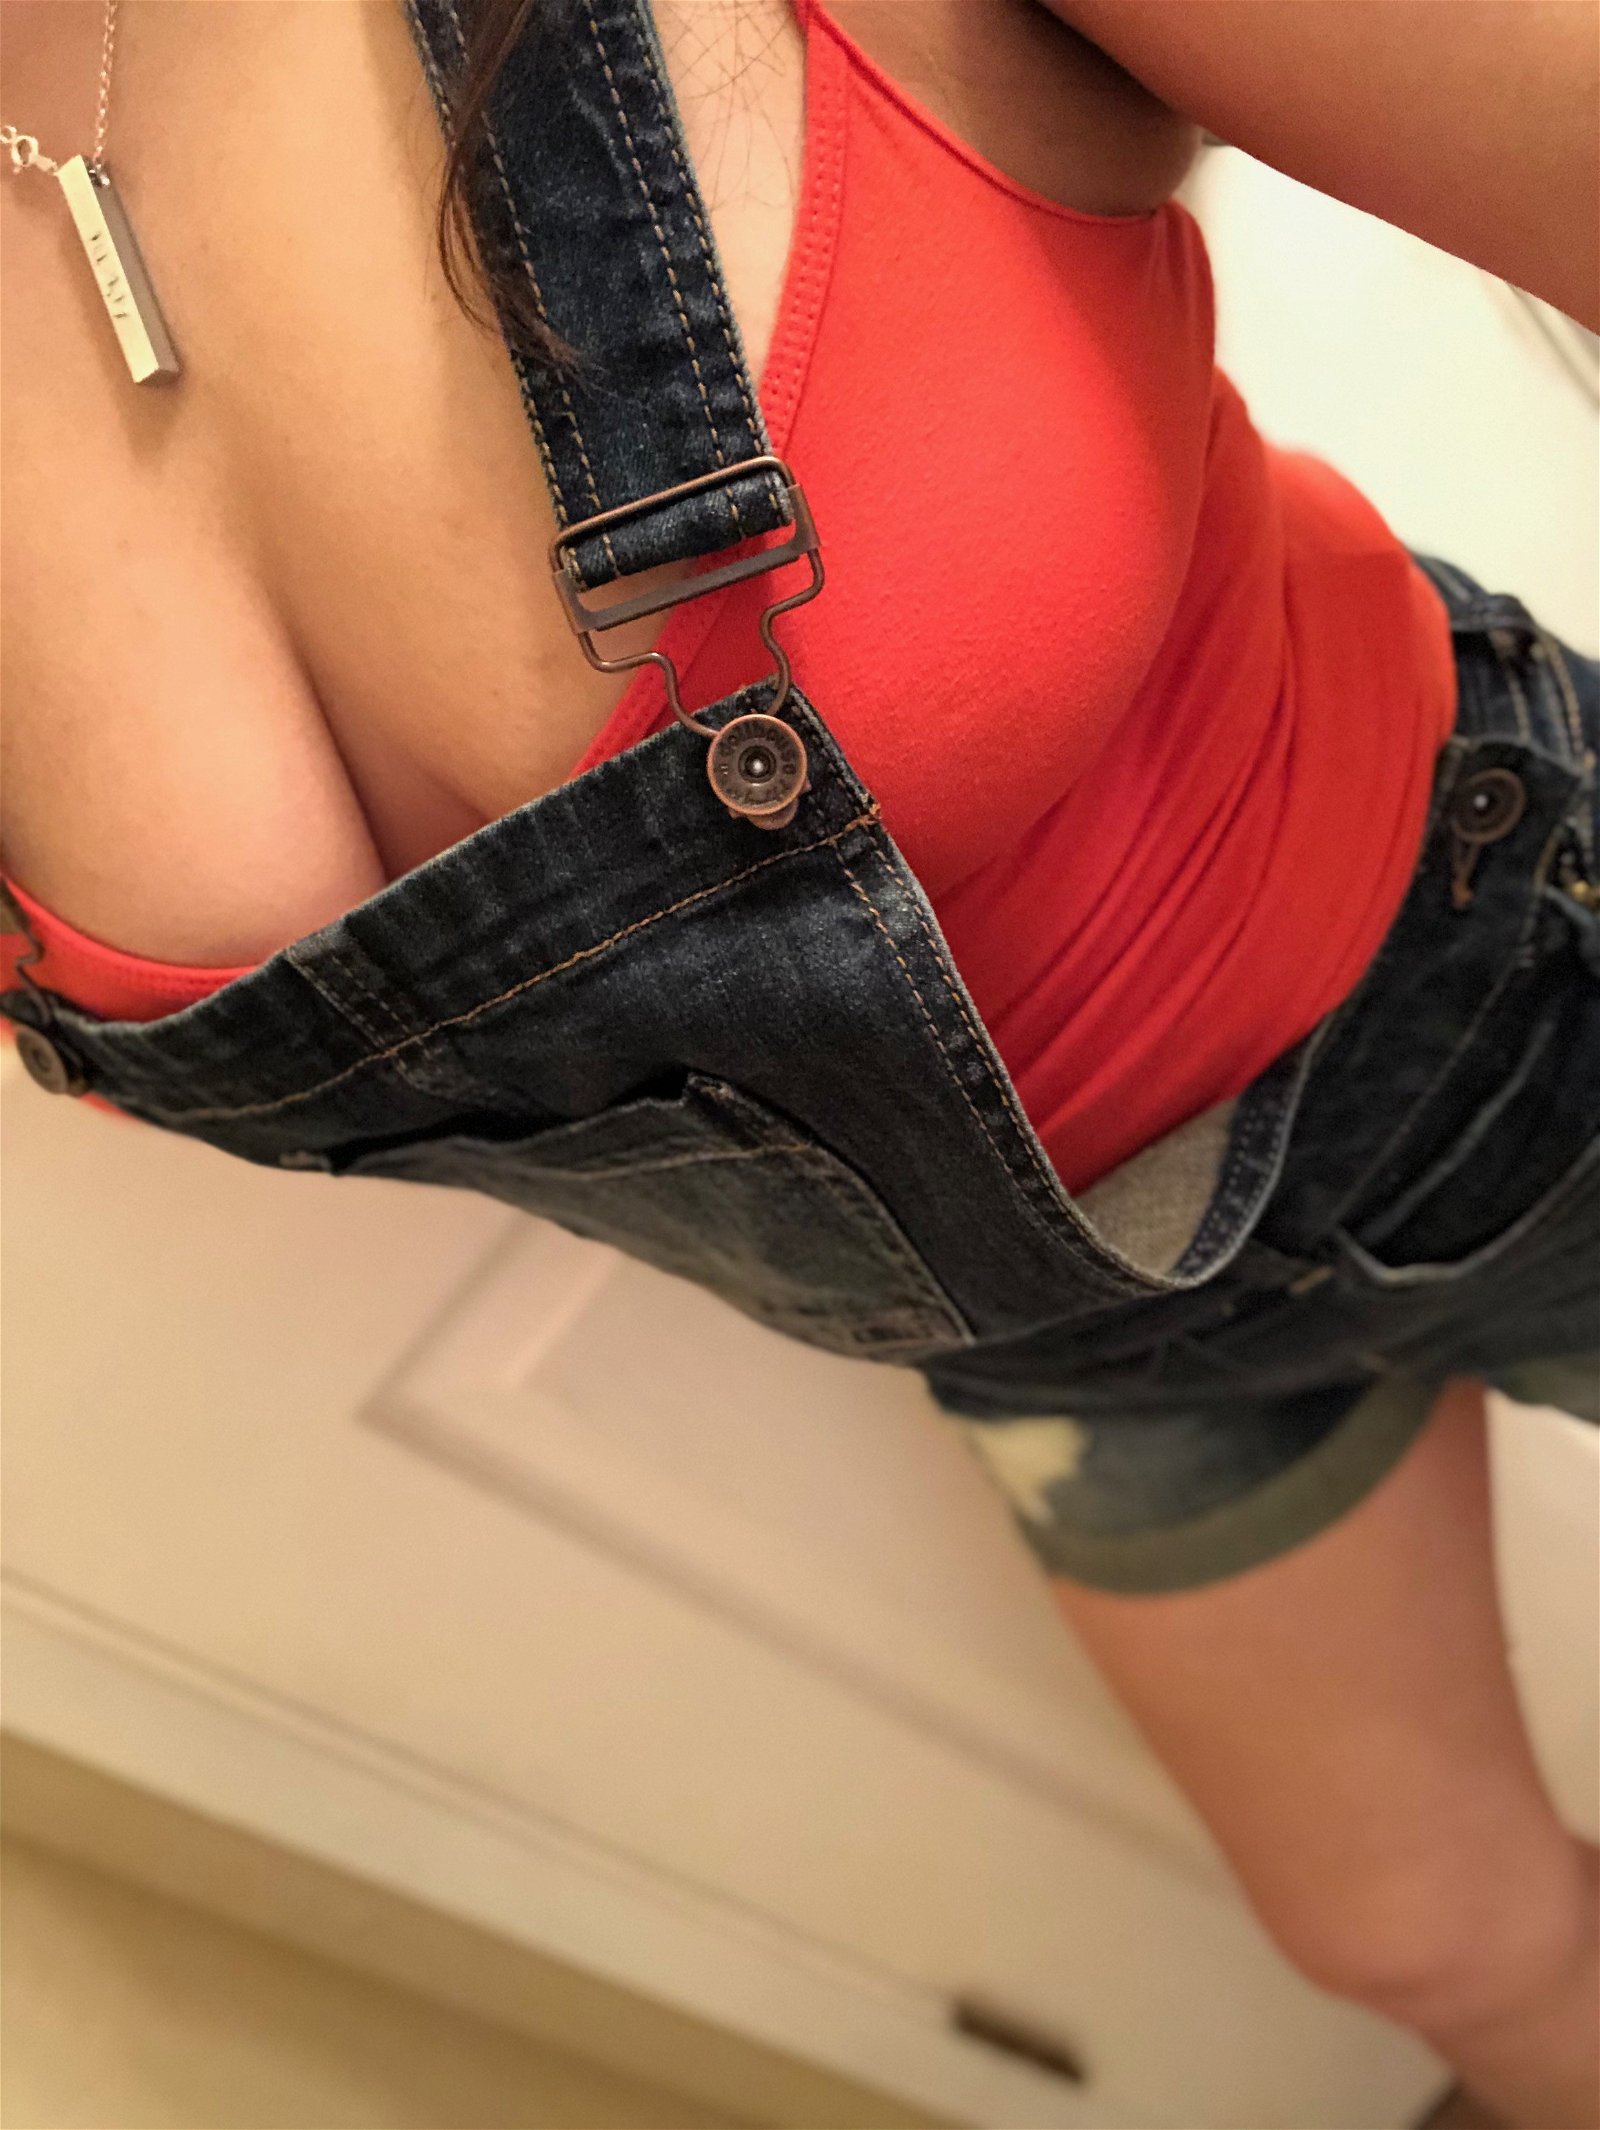 Photo by Sexylexy84 with the username @Sexylexy84,  May 30, 2019 at 4:35 AM. The post is about the topic Hotwife